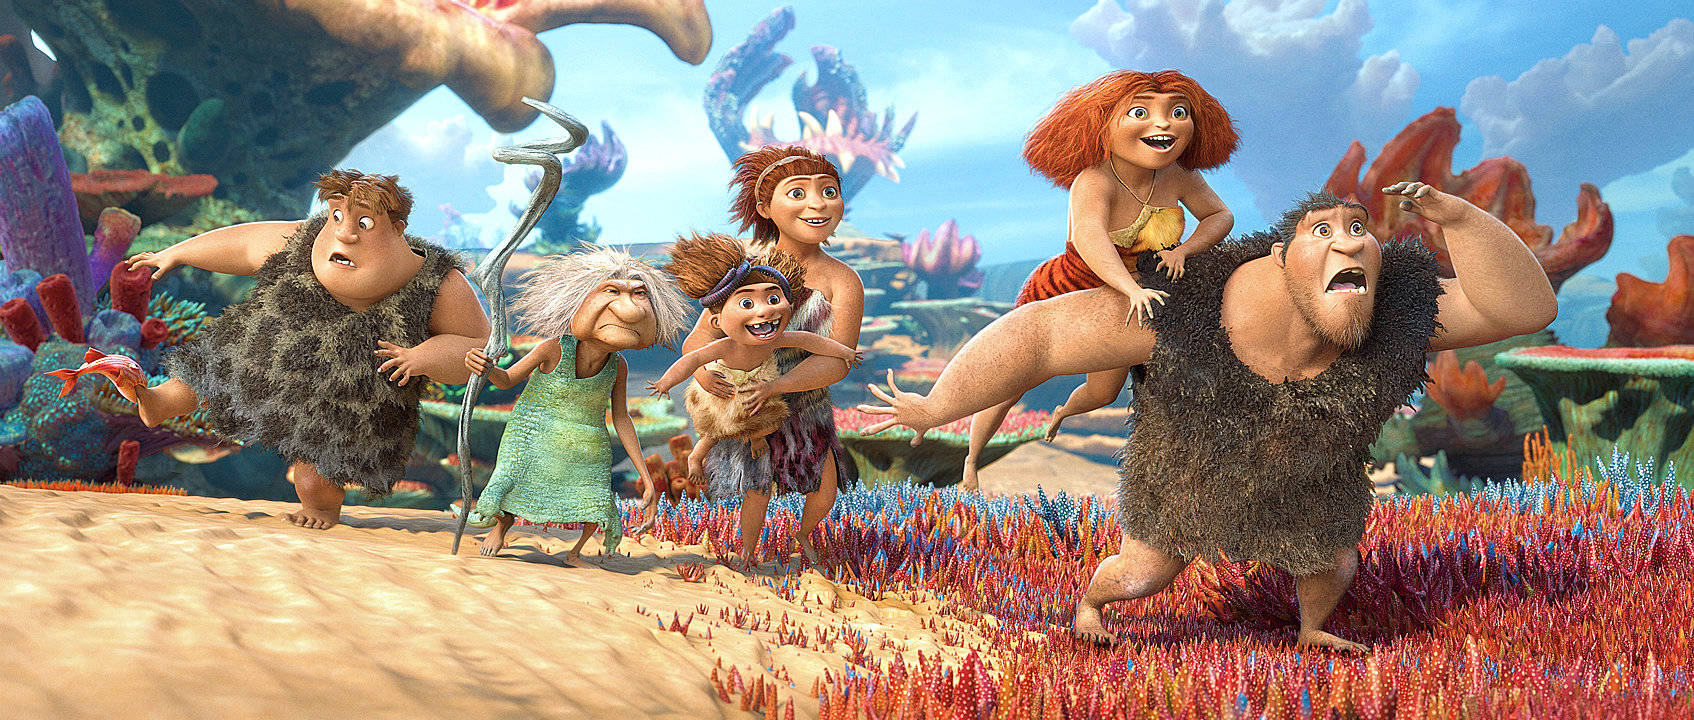 The Croods Family Exploring Together Wallpaper